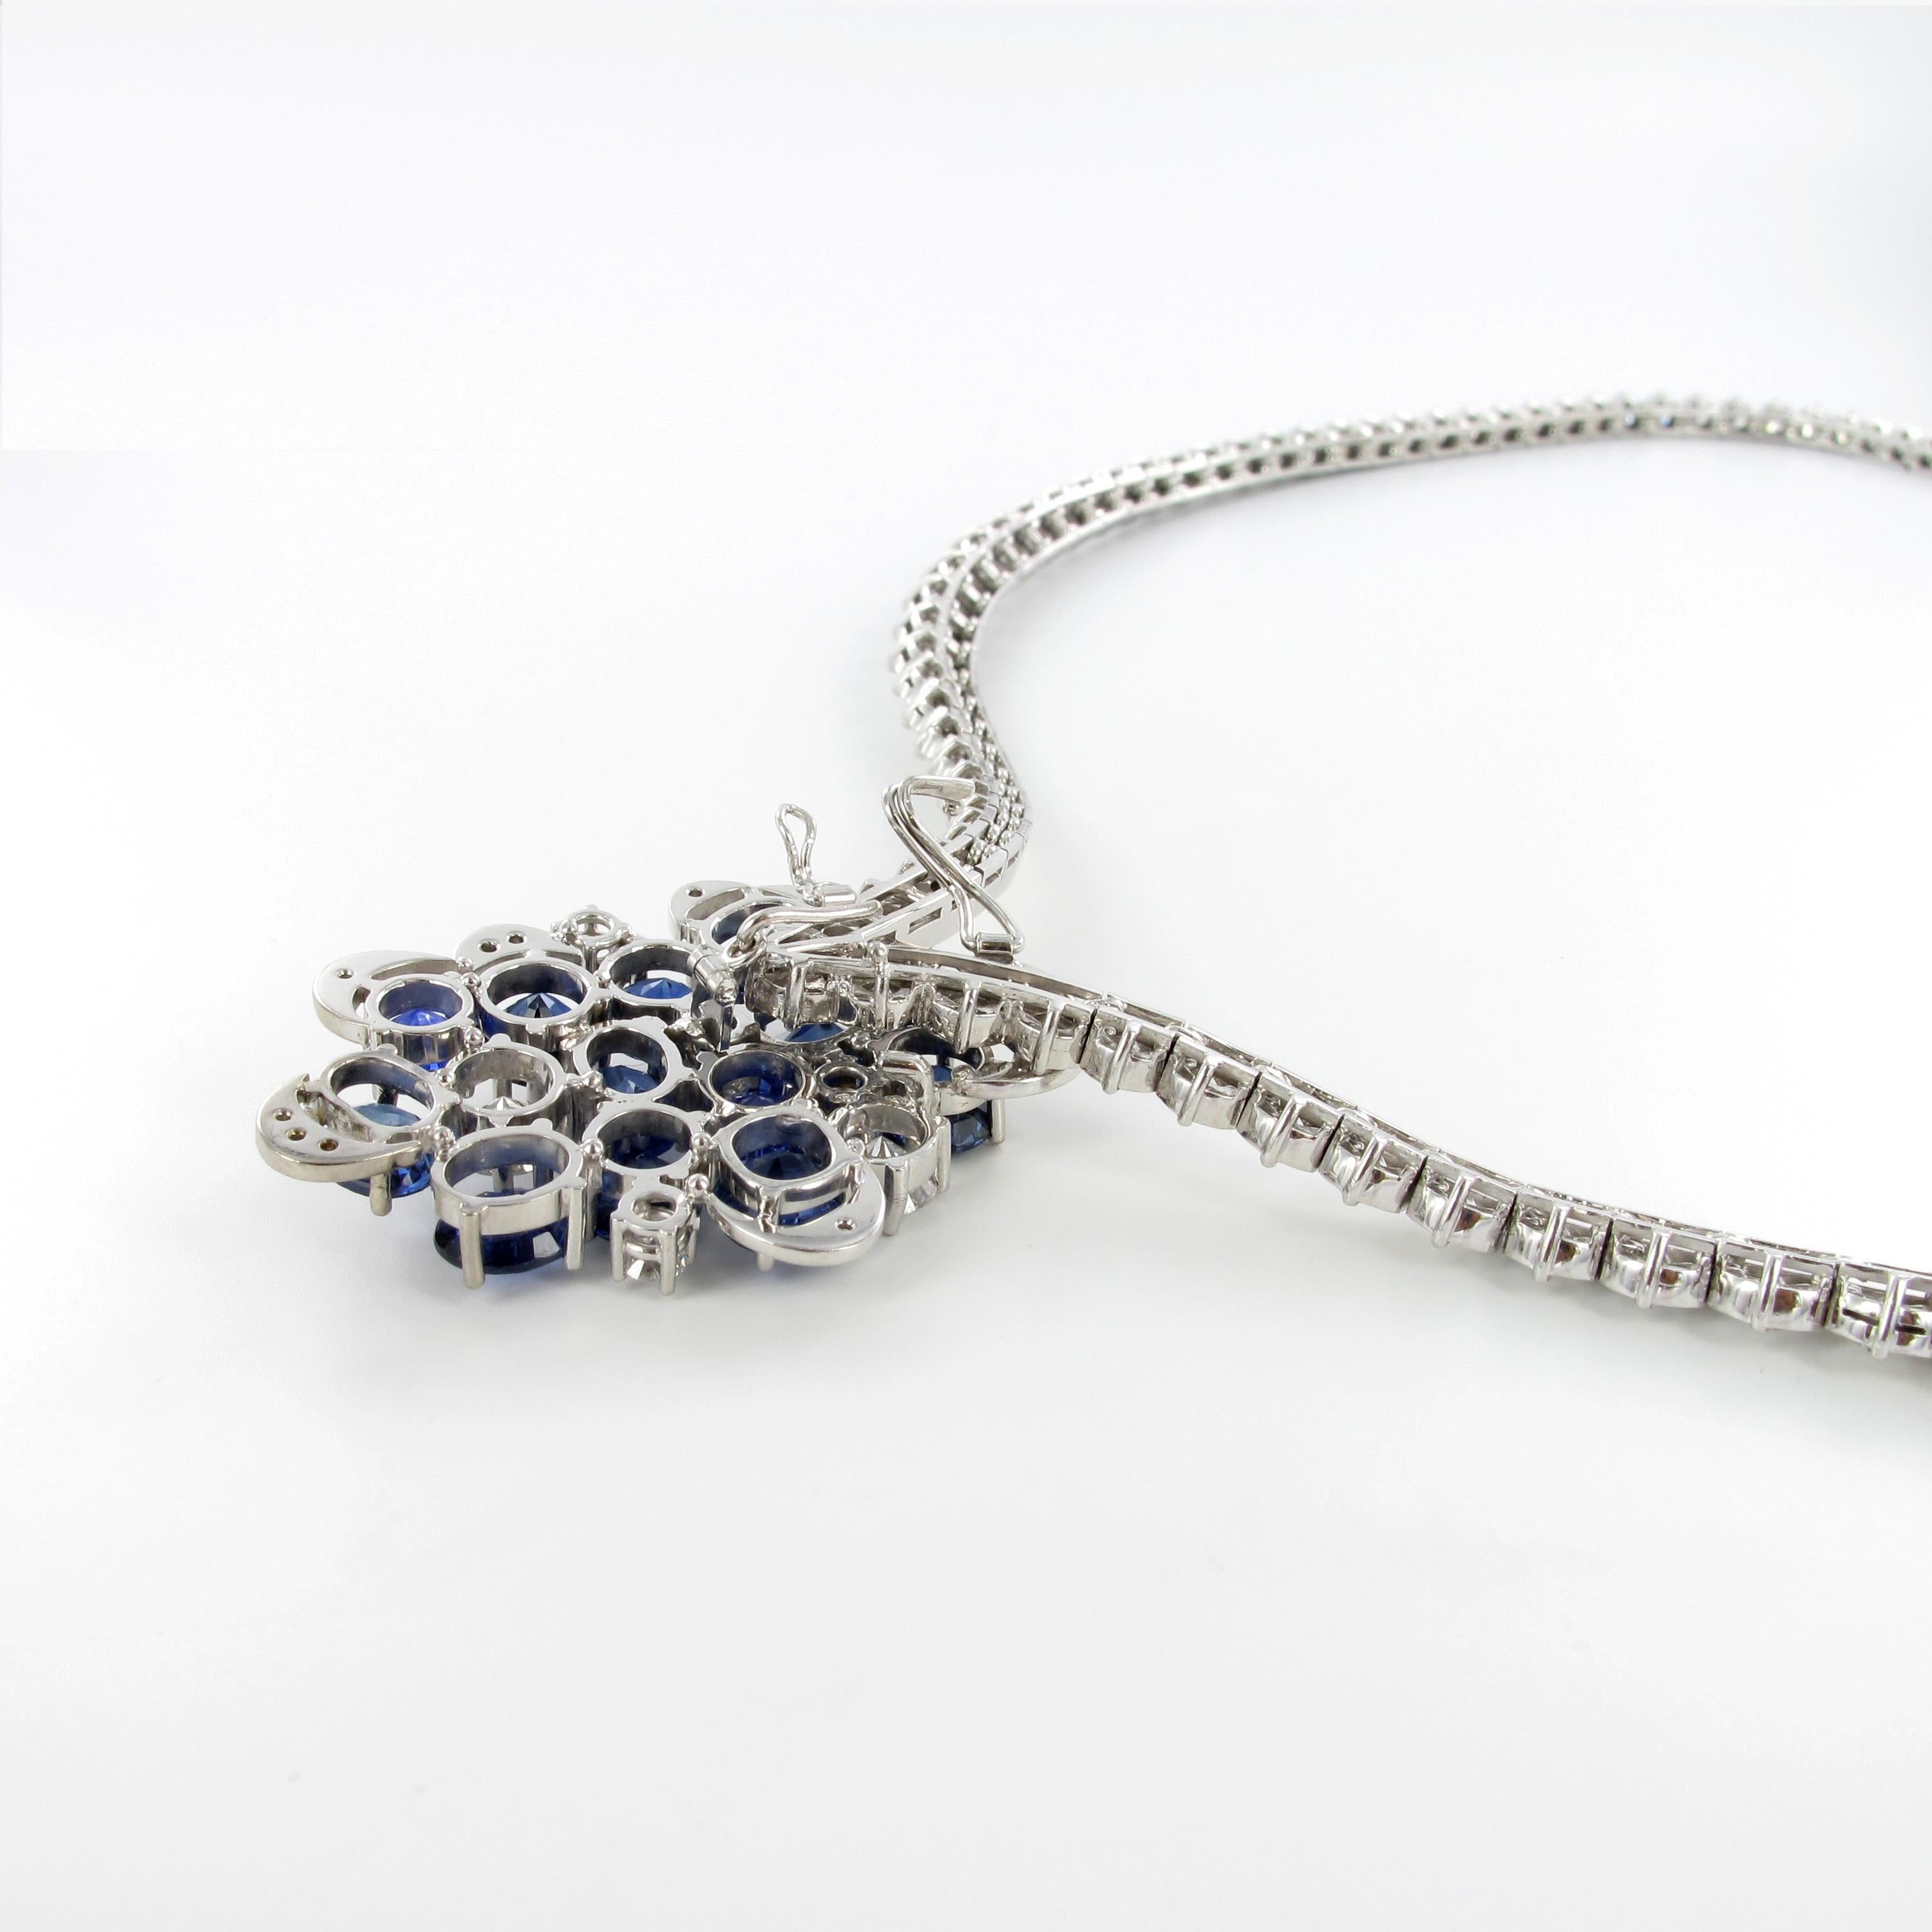 Elegant Diamond and Sapphire Necklace in 950 Platinum by Schilling In Excellent Condition For Sale In Lucerne, CH